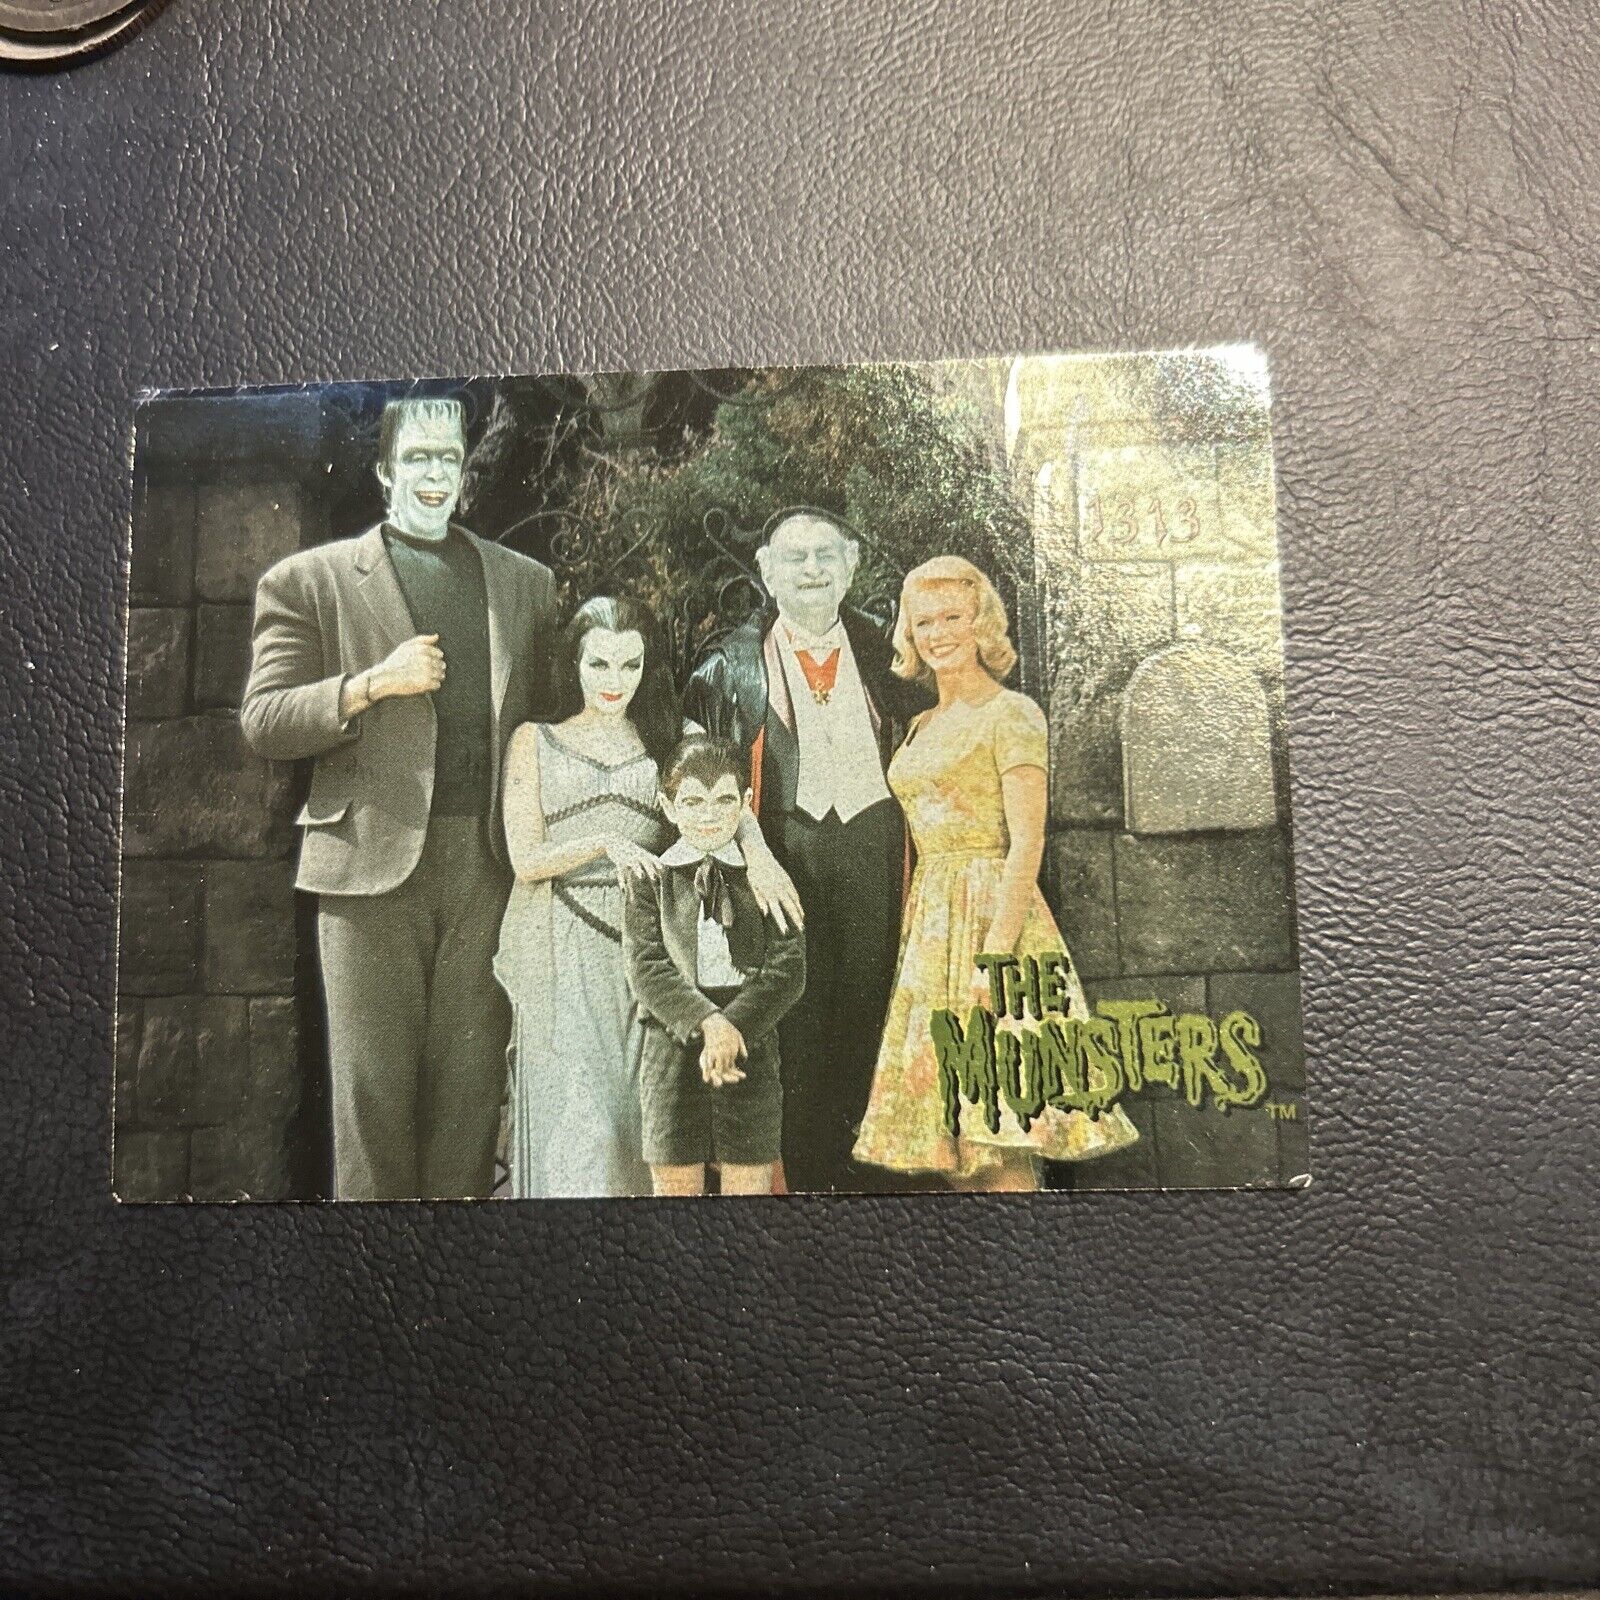 Jb3c The Munsters Deluxe Collection 1996 #1 Family, 1313 Mockingbird Ln. eddie